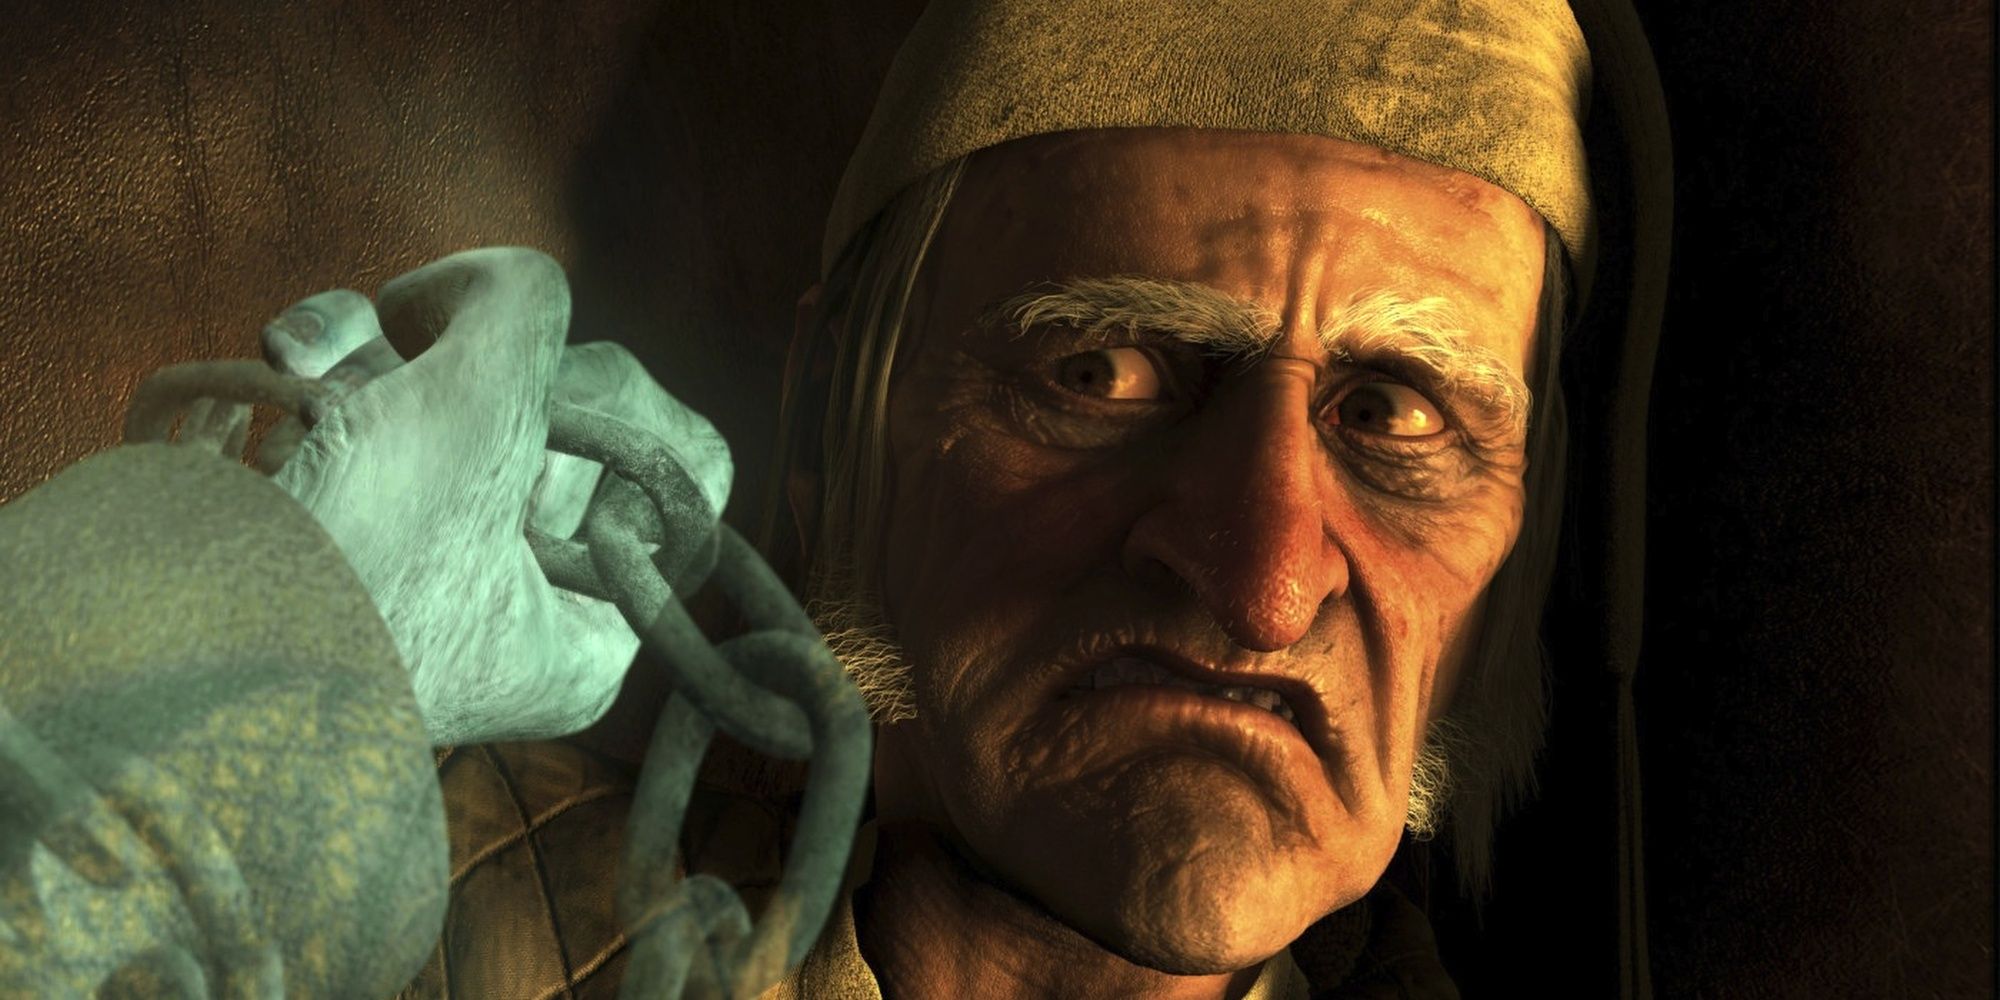 The Jim Carrey version of Ebenezer Scrooge is visited by a ghost.